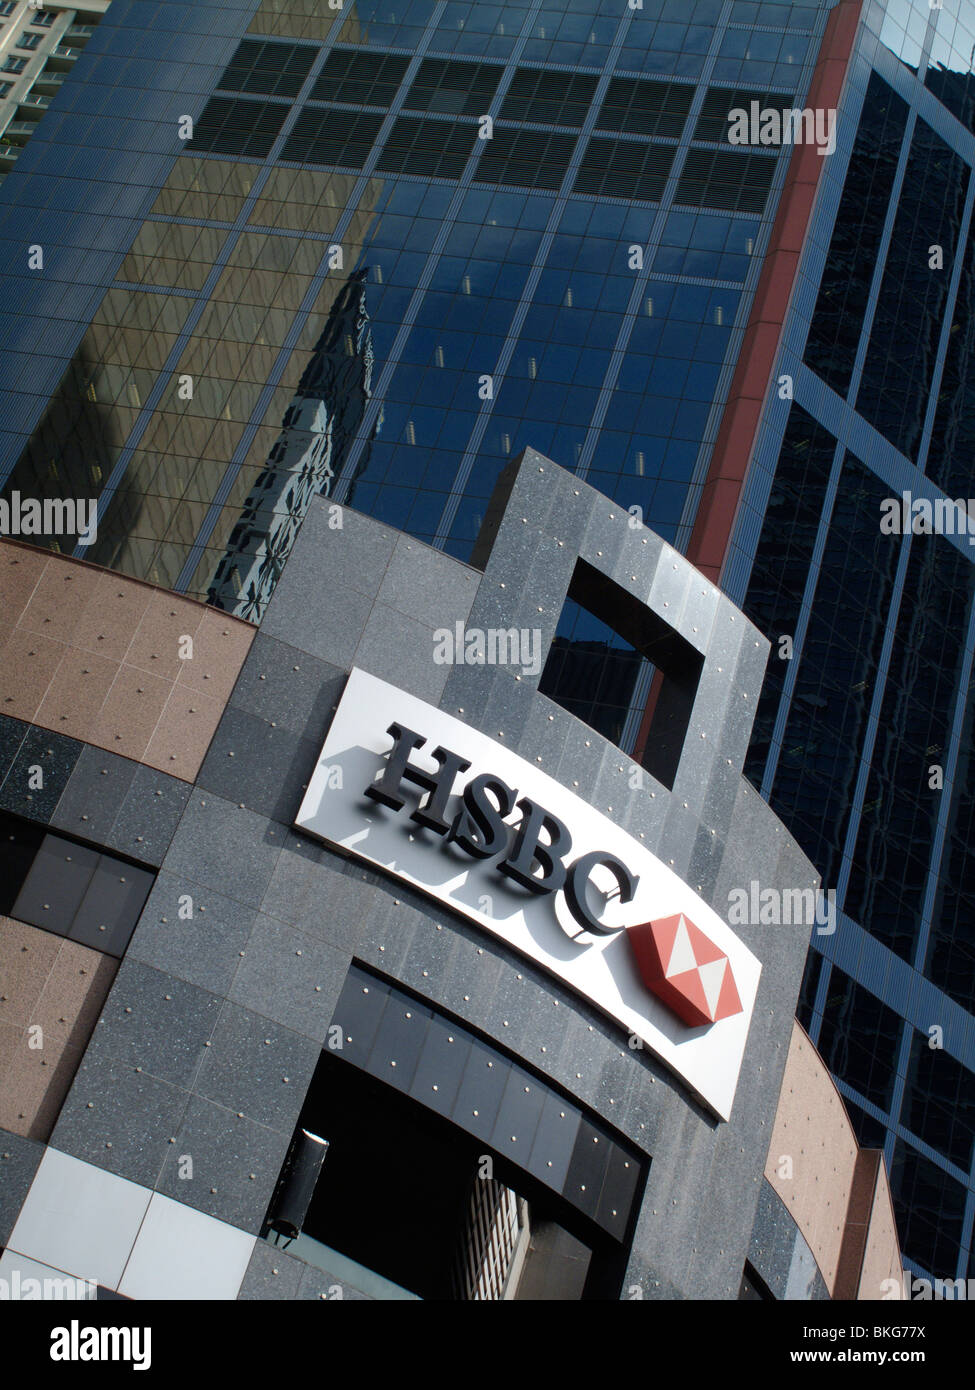 A sign on a building for the HSBC bank in Sydney, Australia Stock Photo